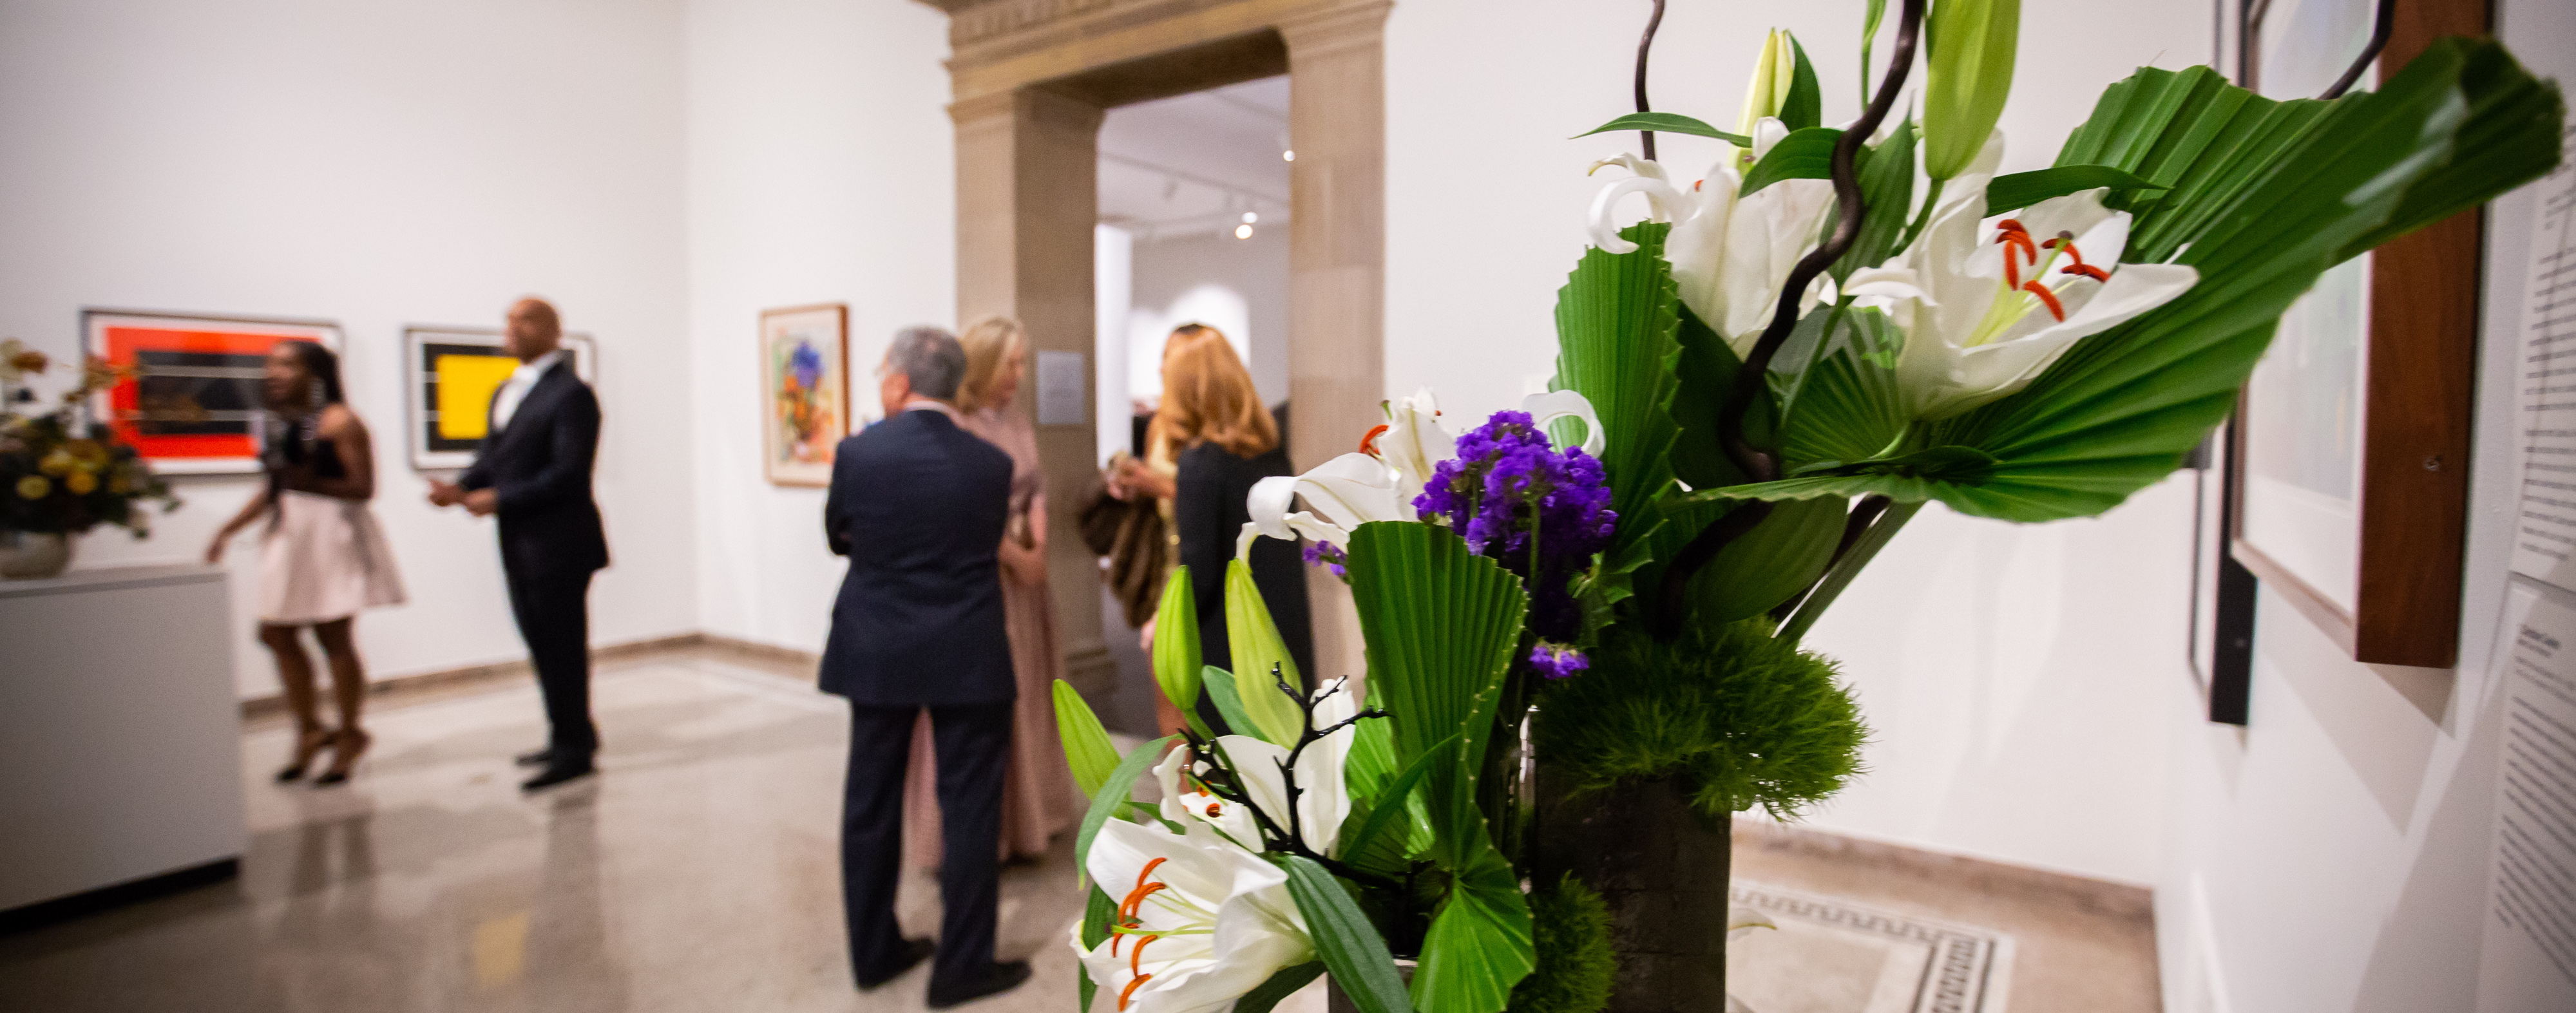 Visitors in the galleries during art in bloom exhibition 2018